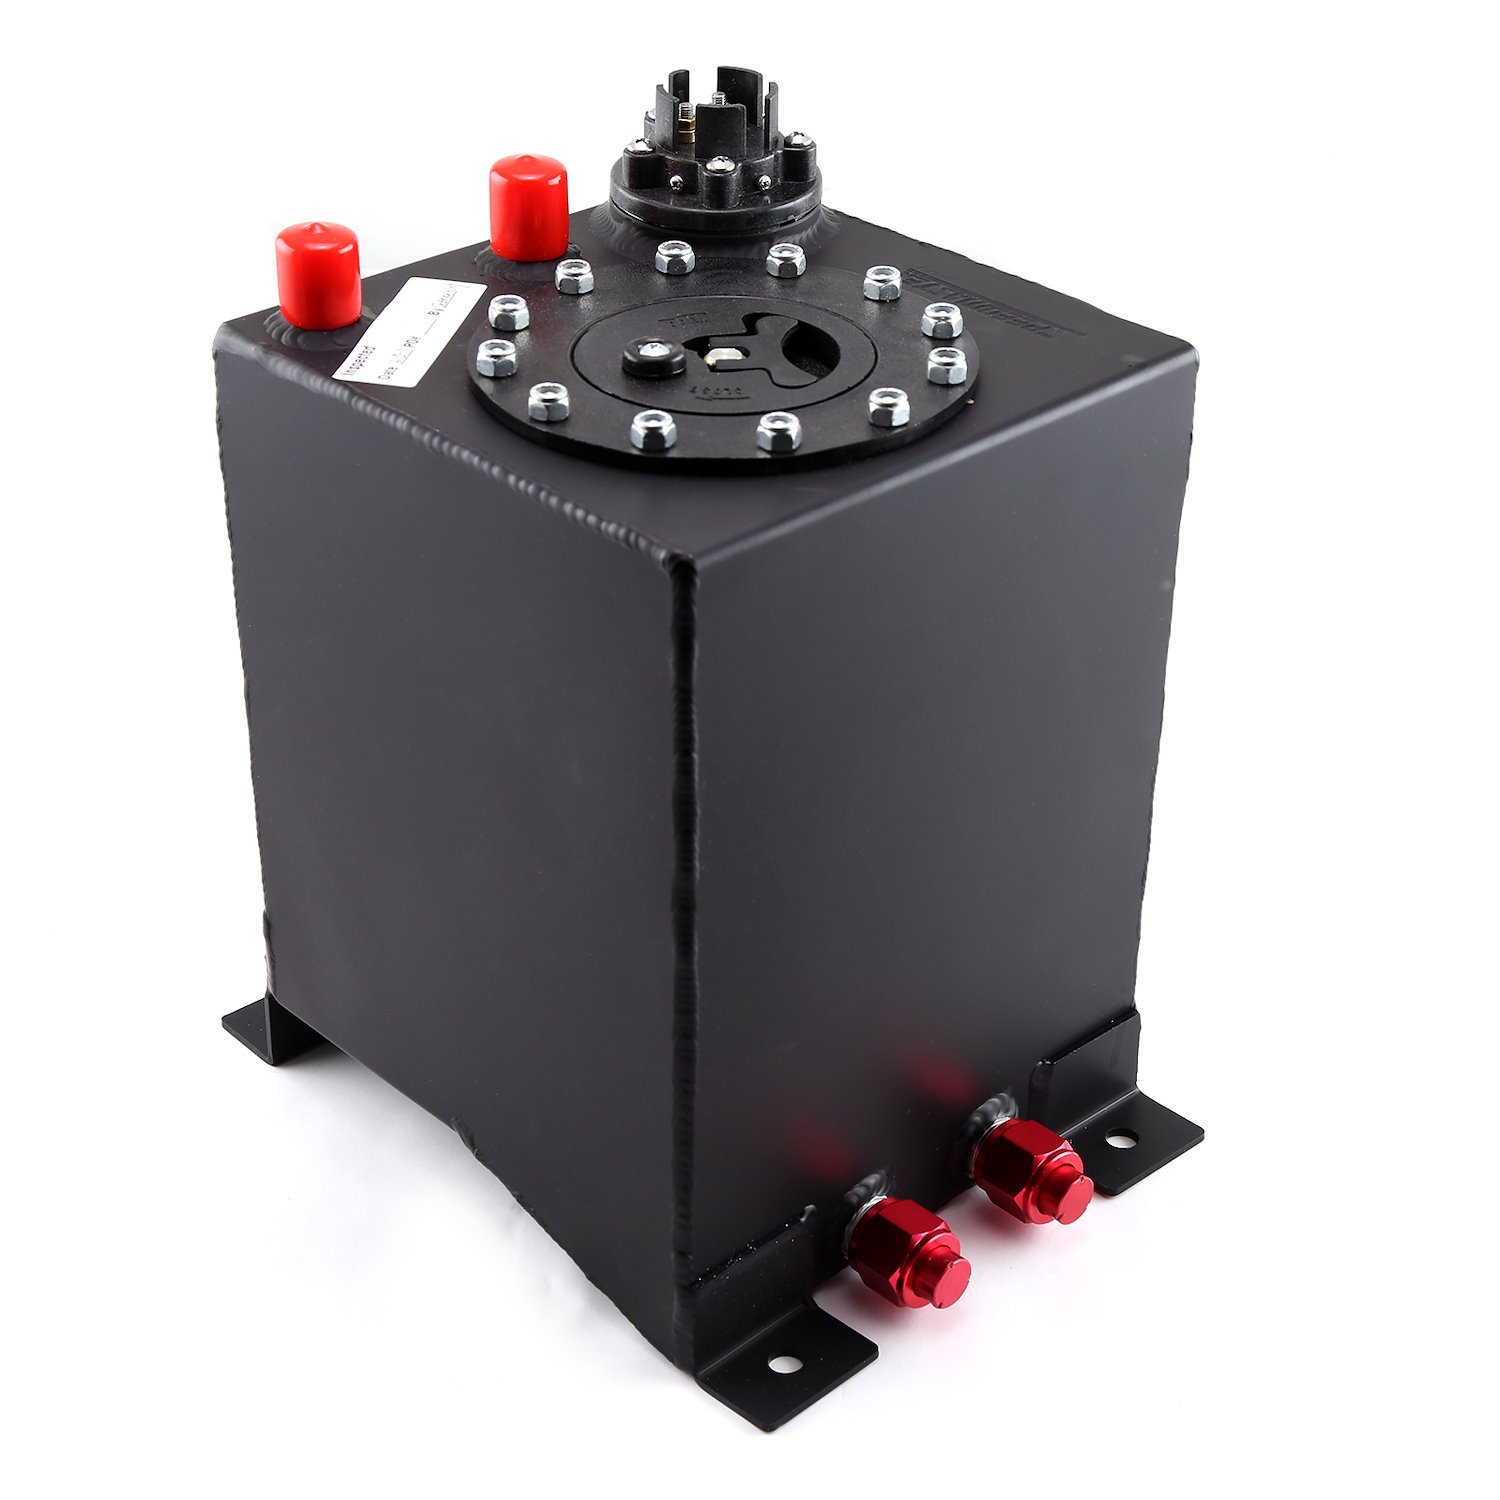 Black Aluminum Fuel Cell with Sender Capacity: 2.5 Gallons